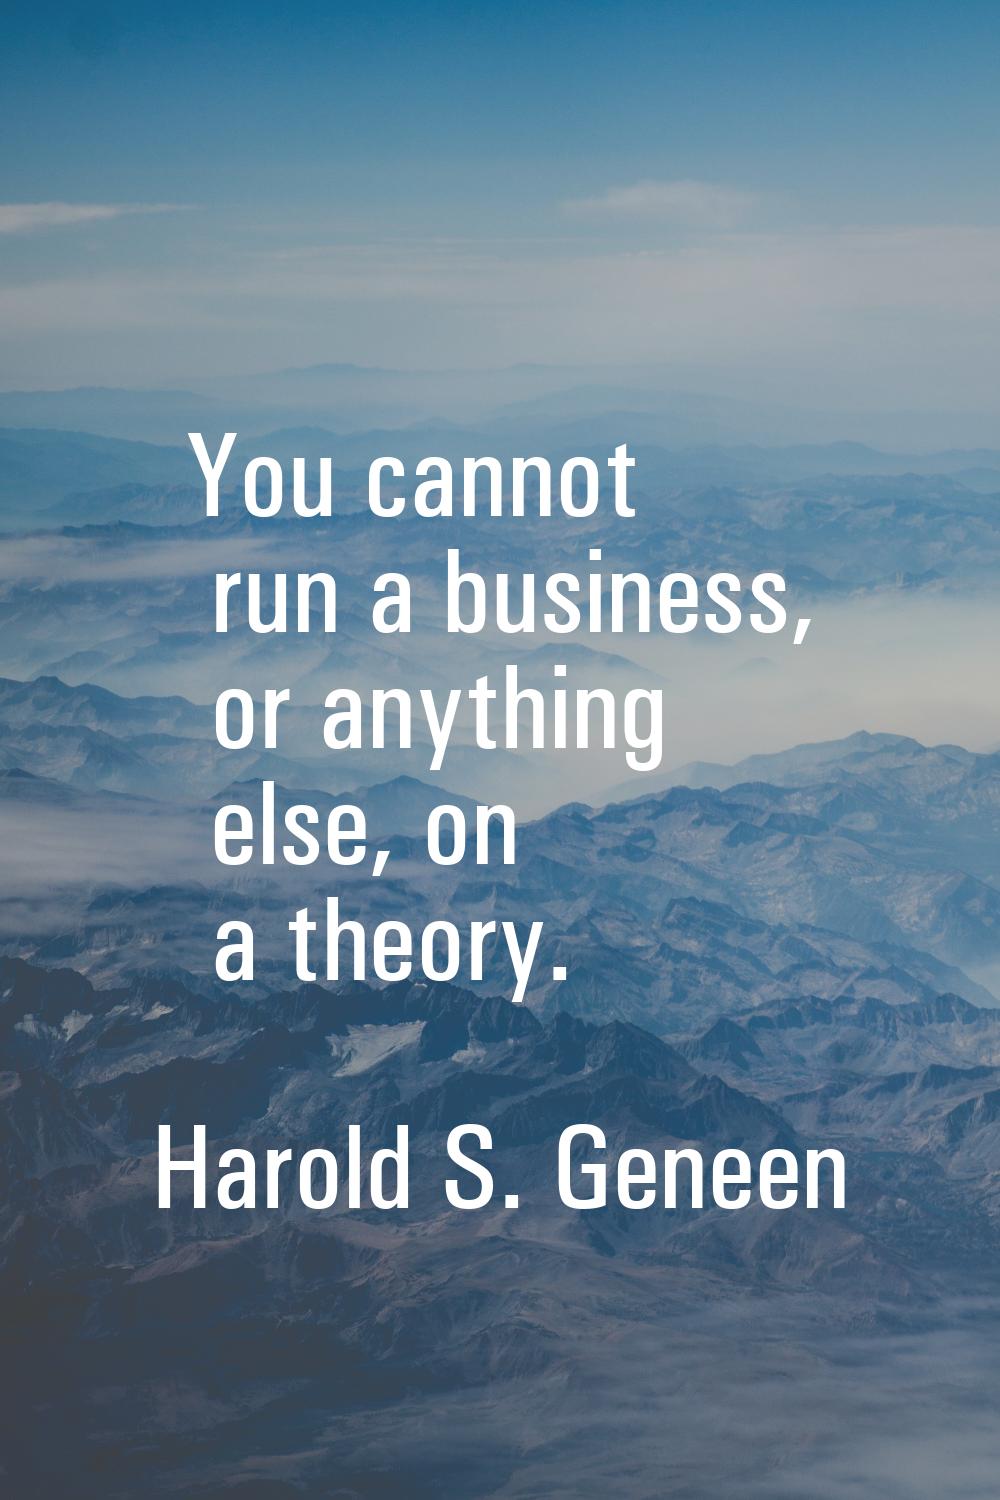 You cannot run a business, or anything else, on a theory.